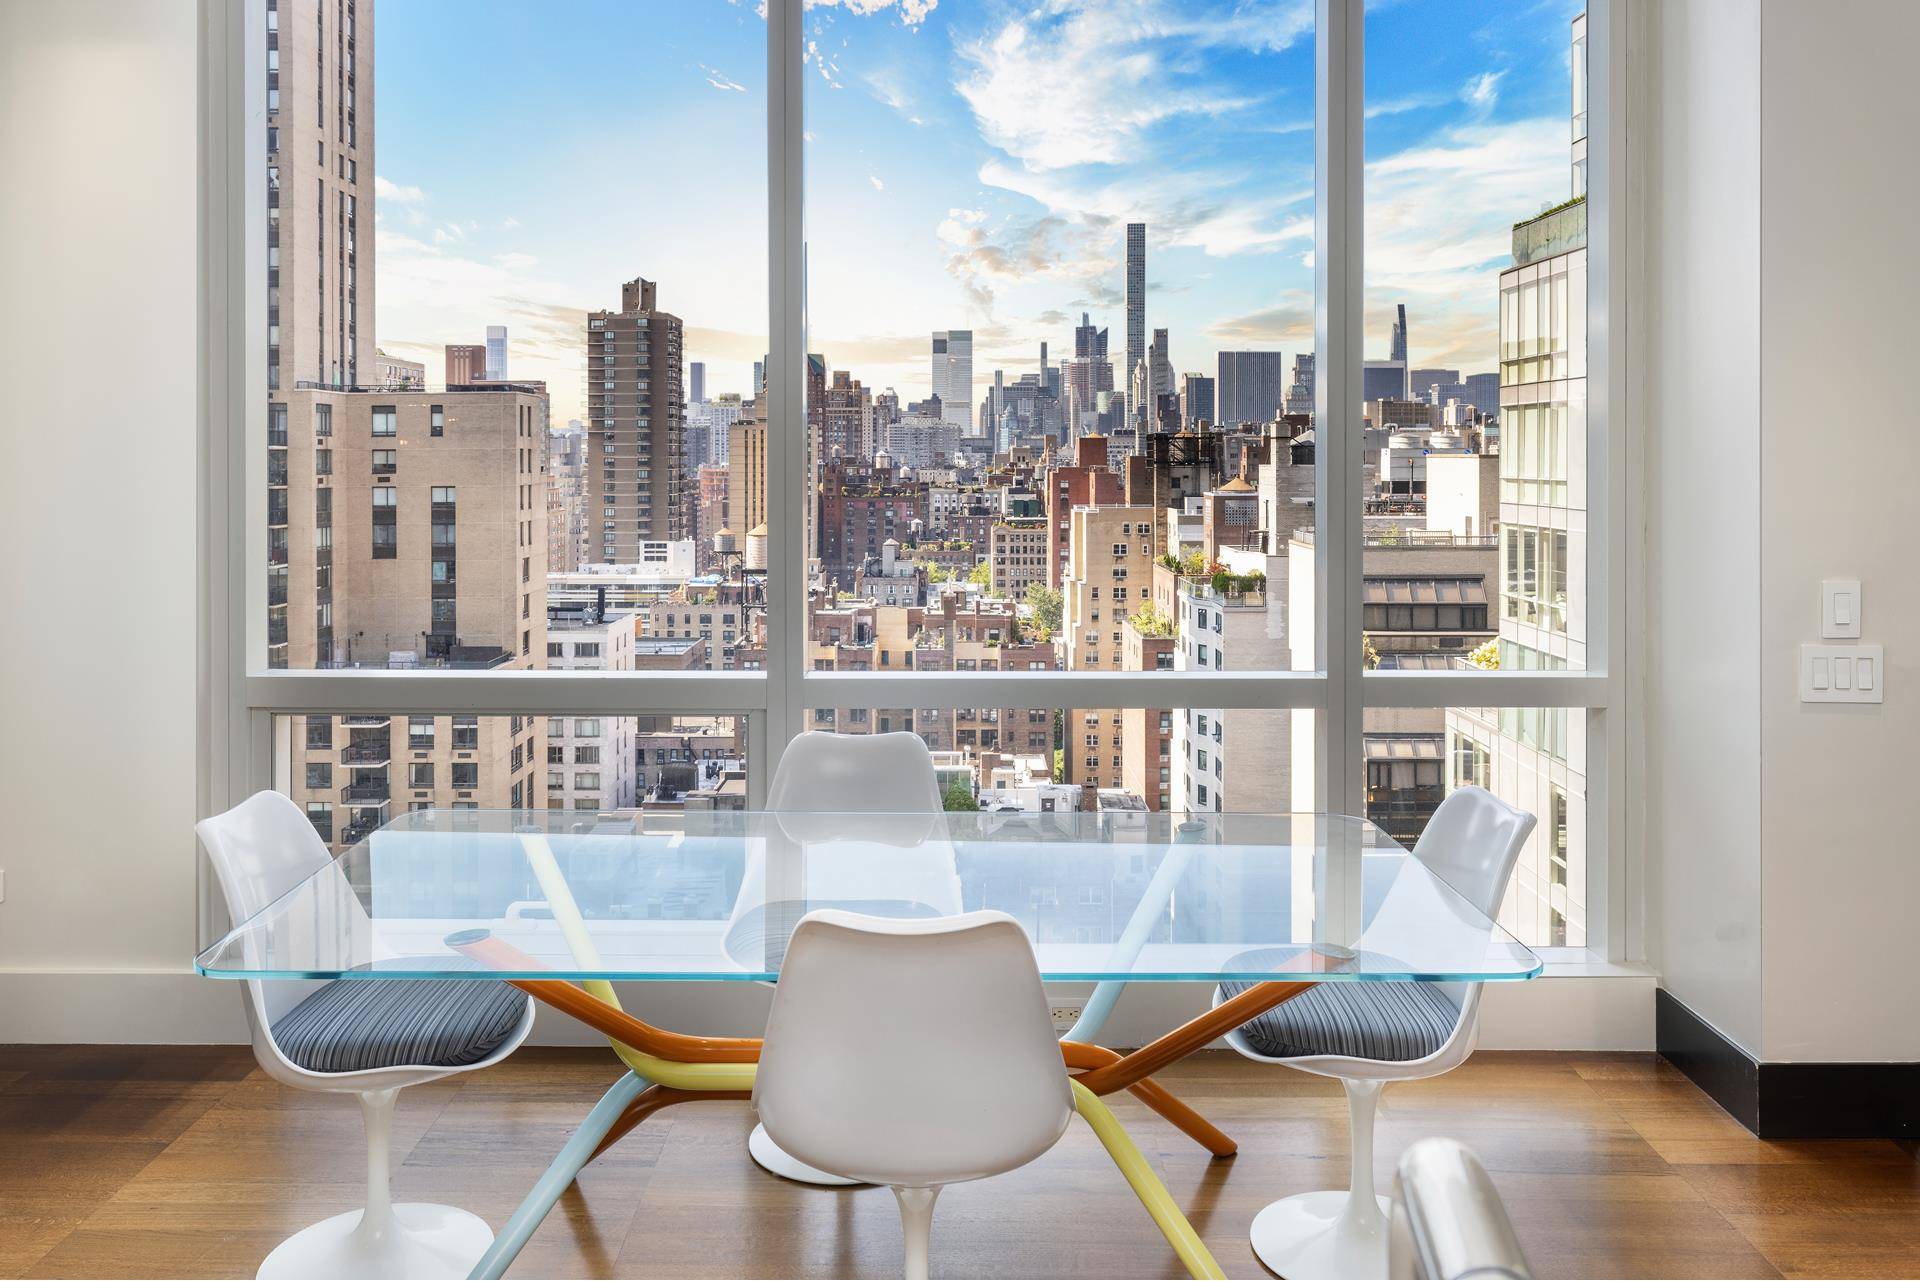 Step inside to this impressive, sun drenched high floor condominium residence spanning an expansive 2, 717 square feet.